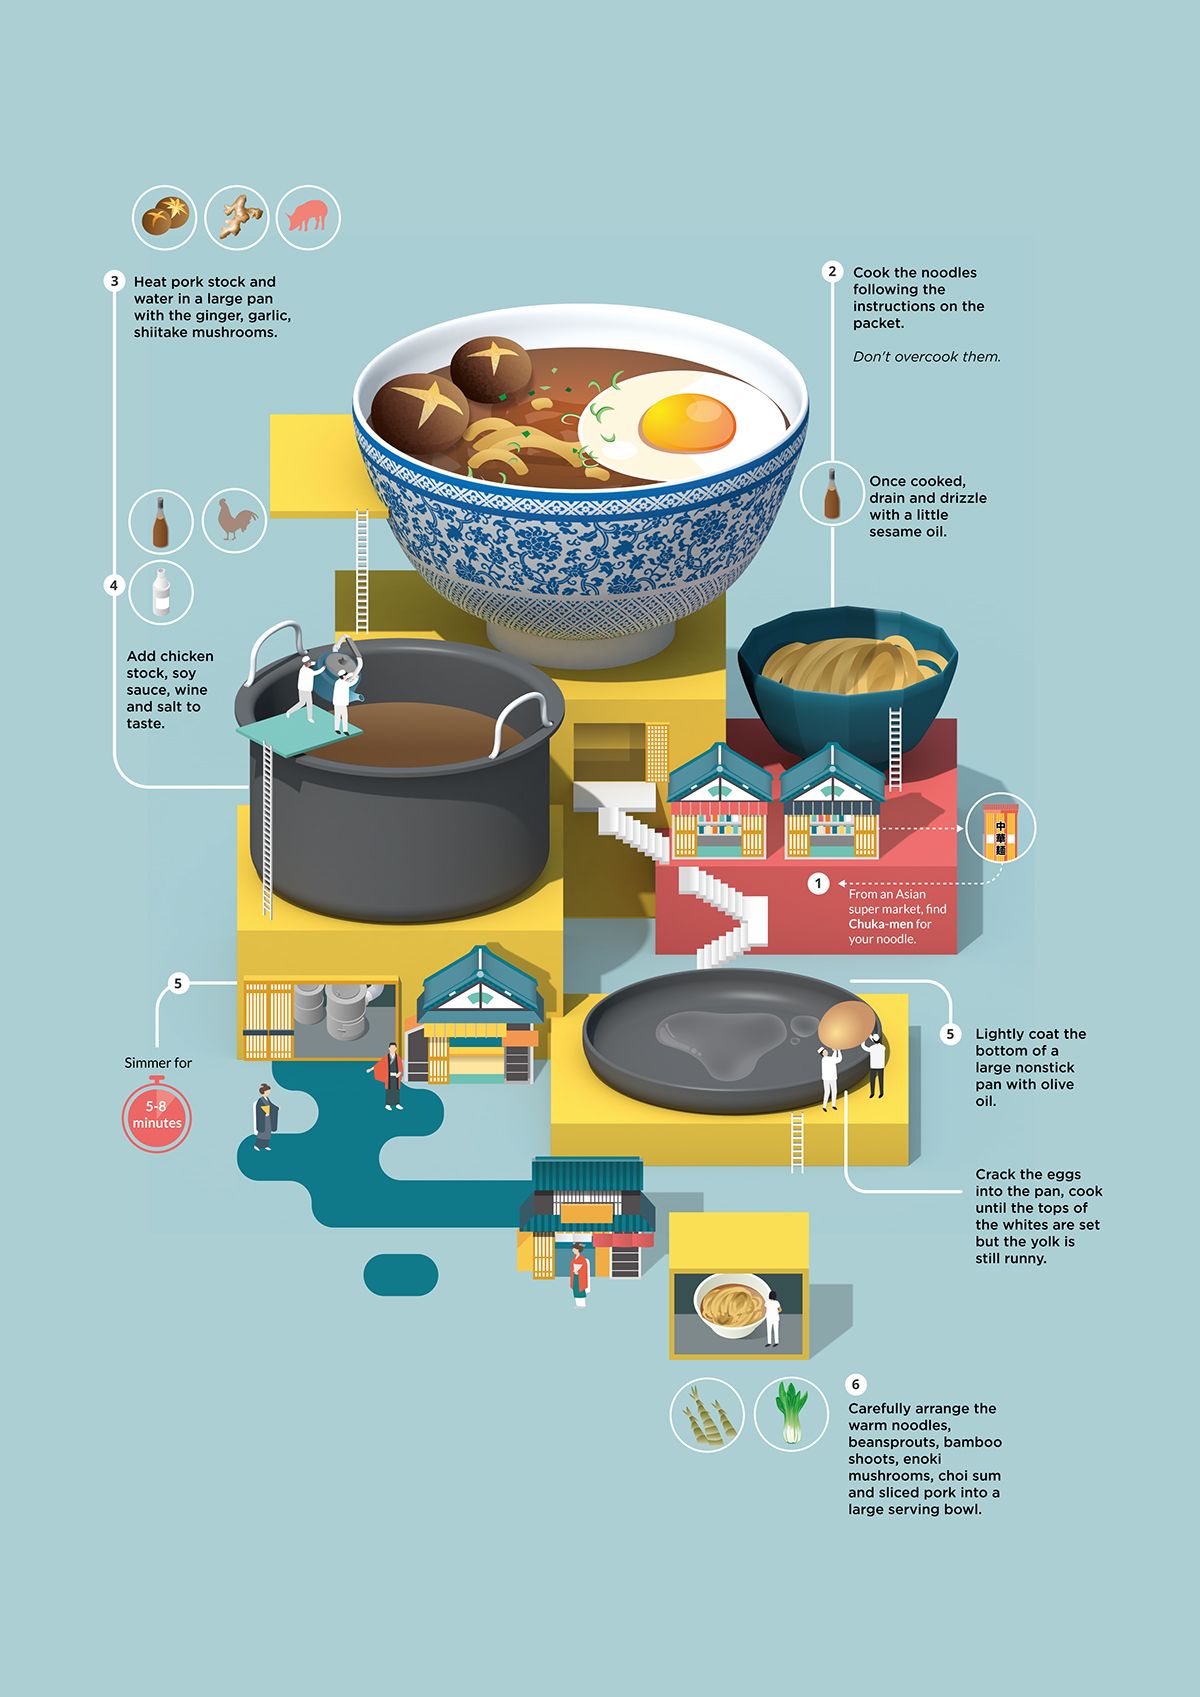 A Truly Adorable Guide to Making Ramen | Daily Infographic